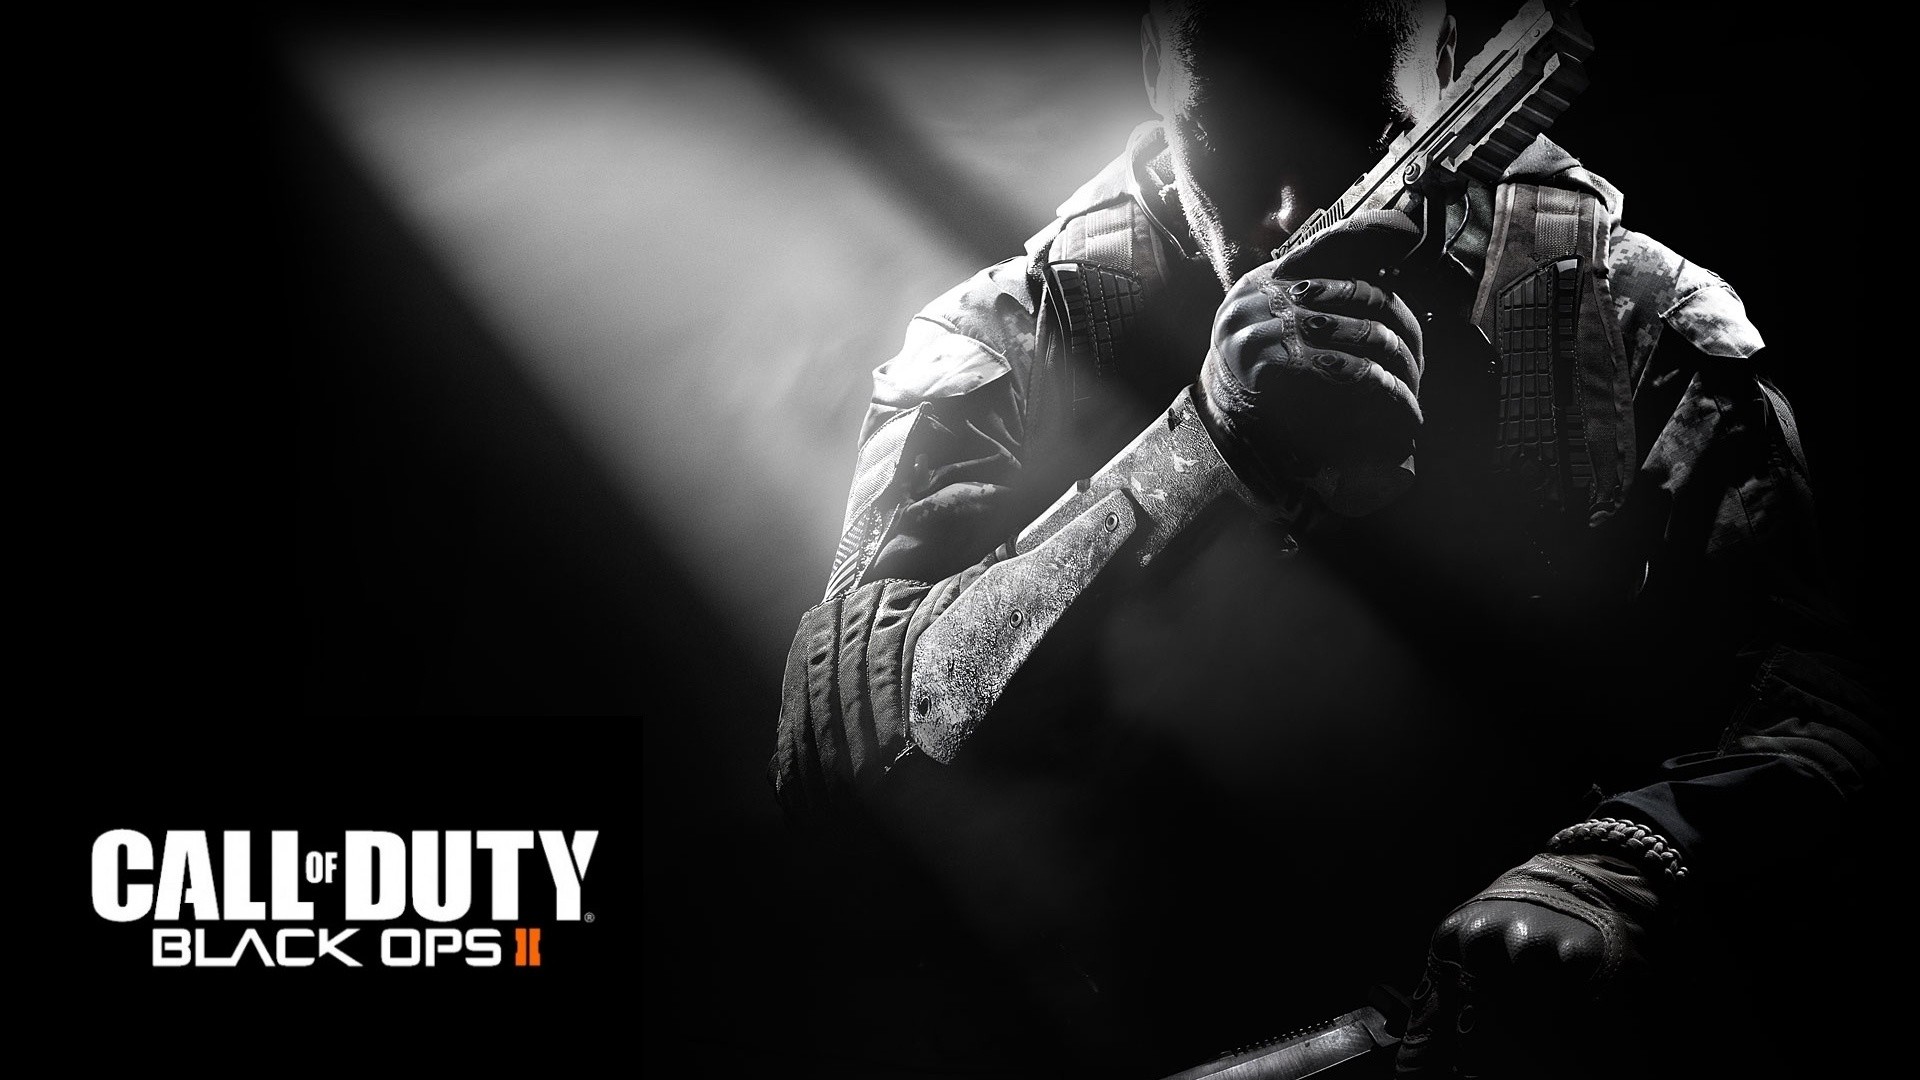 Call Of Duty: Black Ops Wallpaper